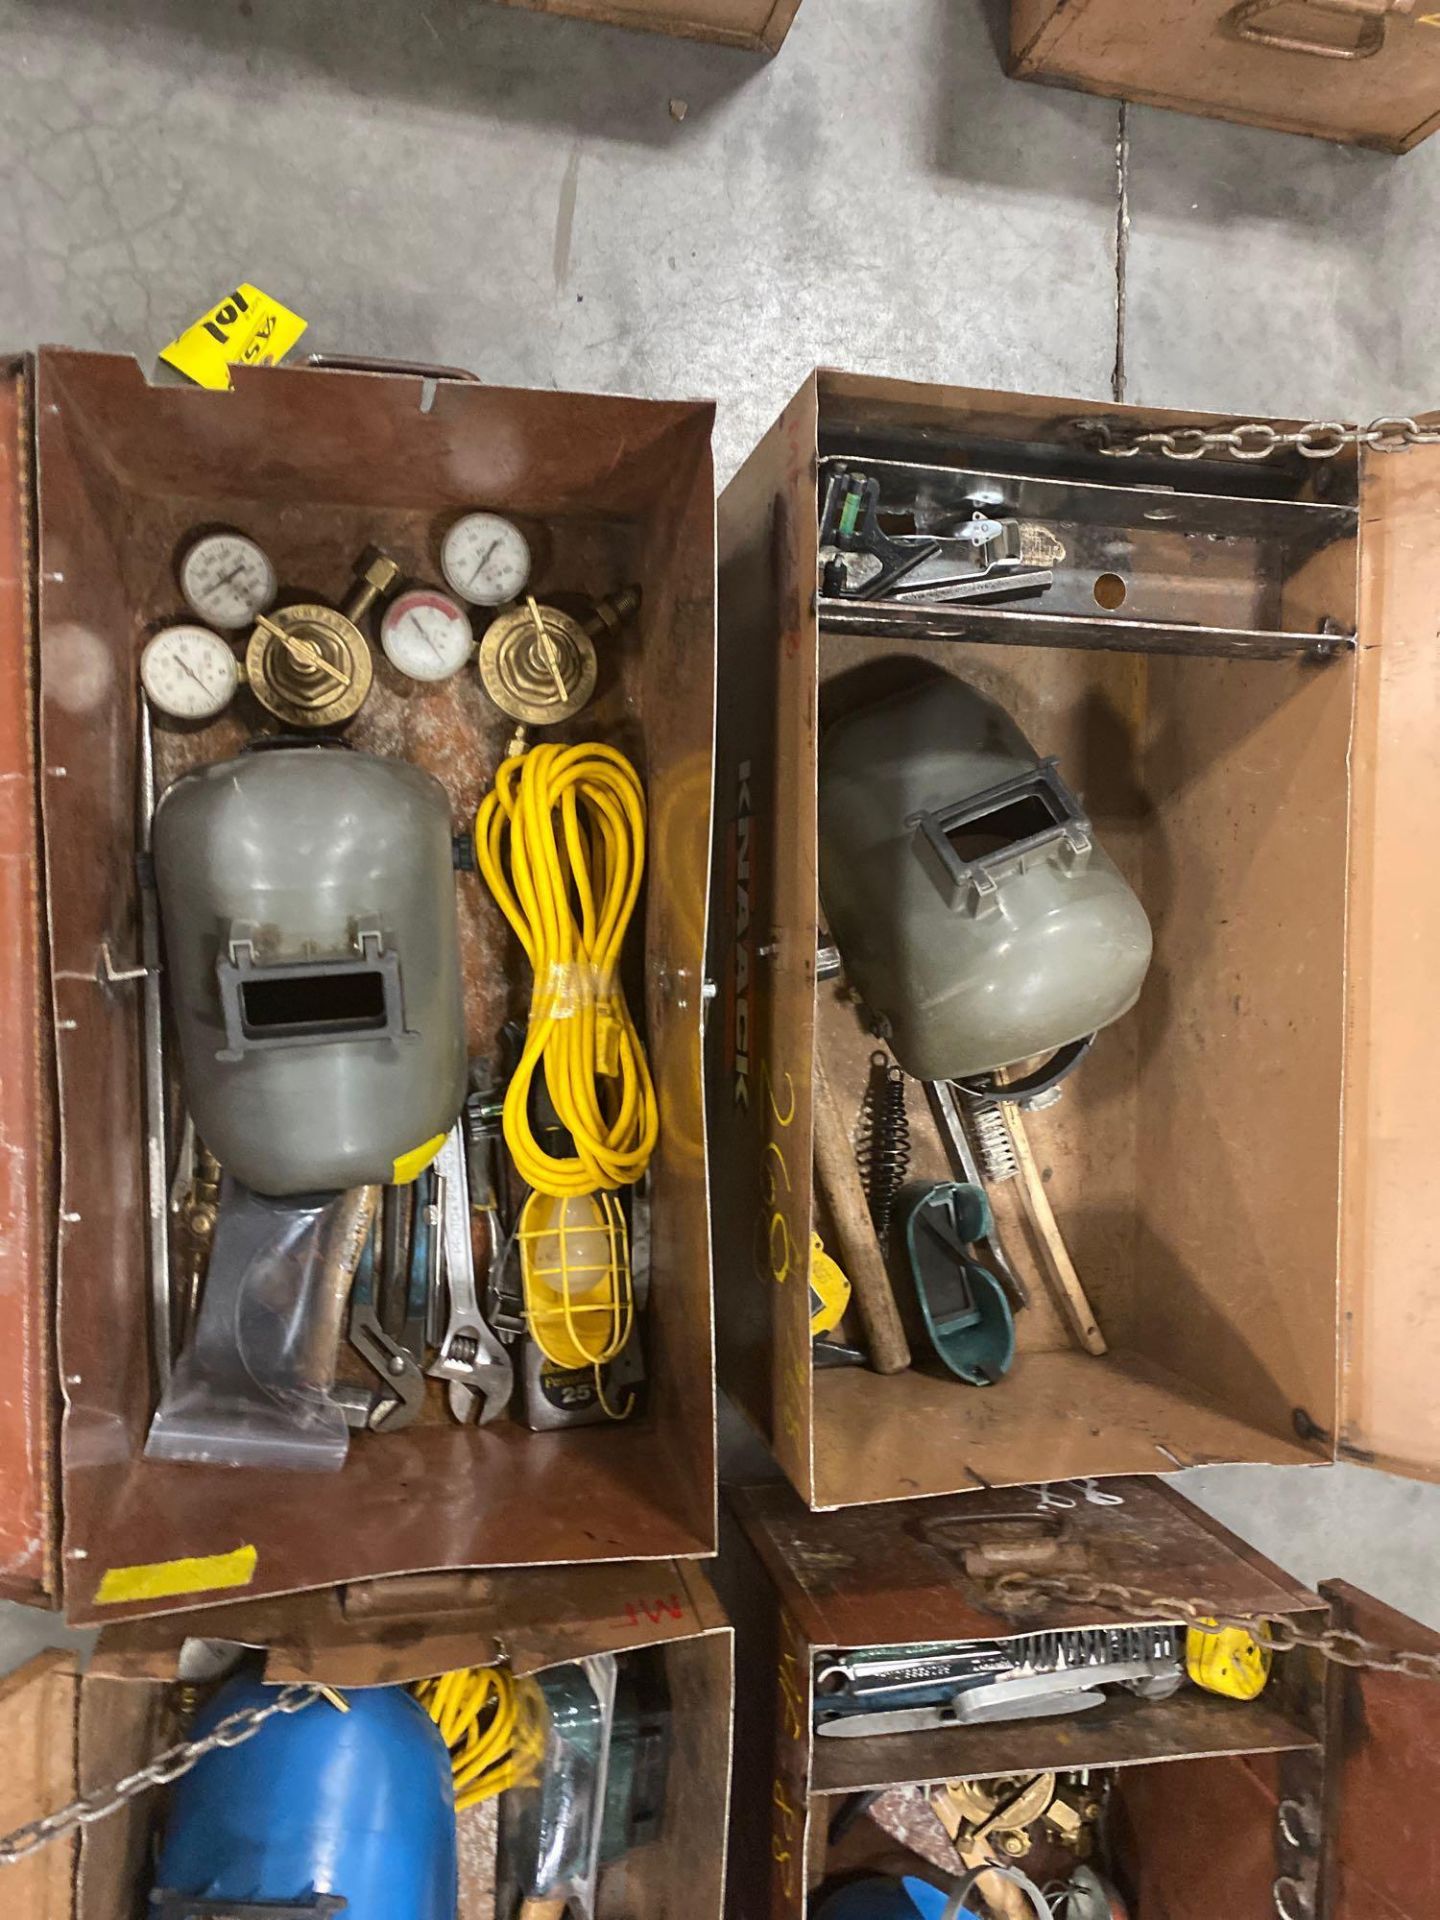 FOUR KNAACK TOOL BOXES WITH CONTENTS/TOOLS - Image 2 of 3